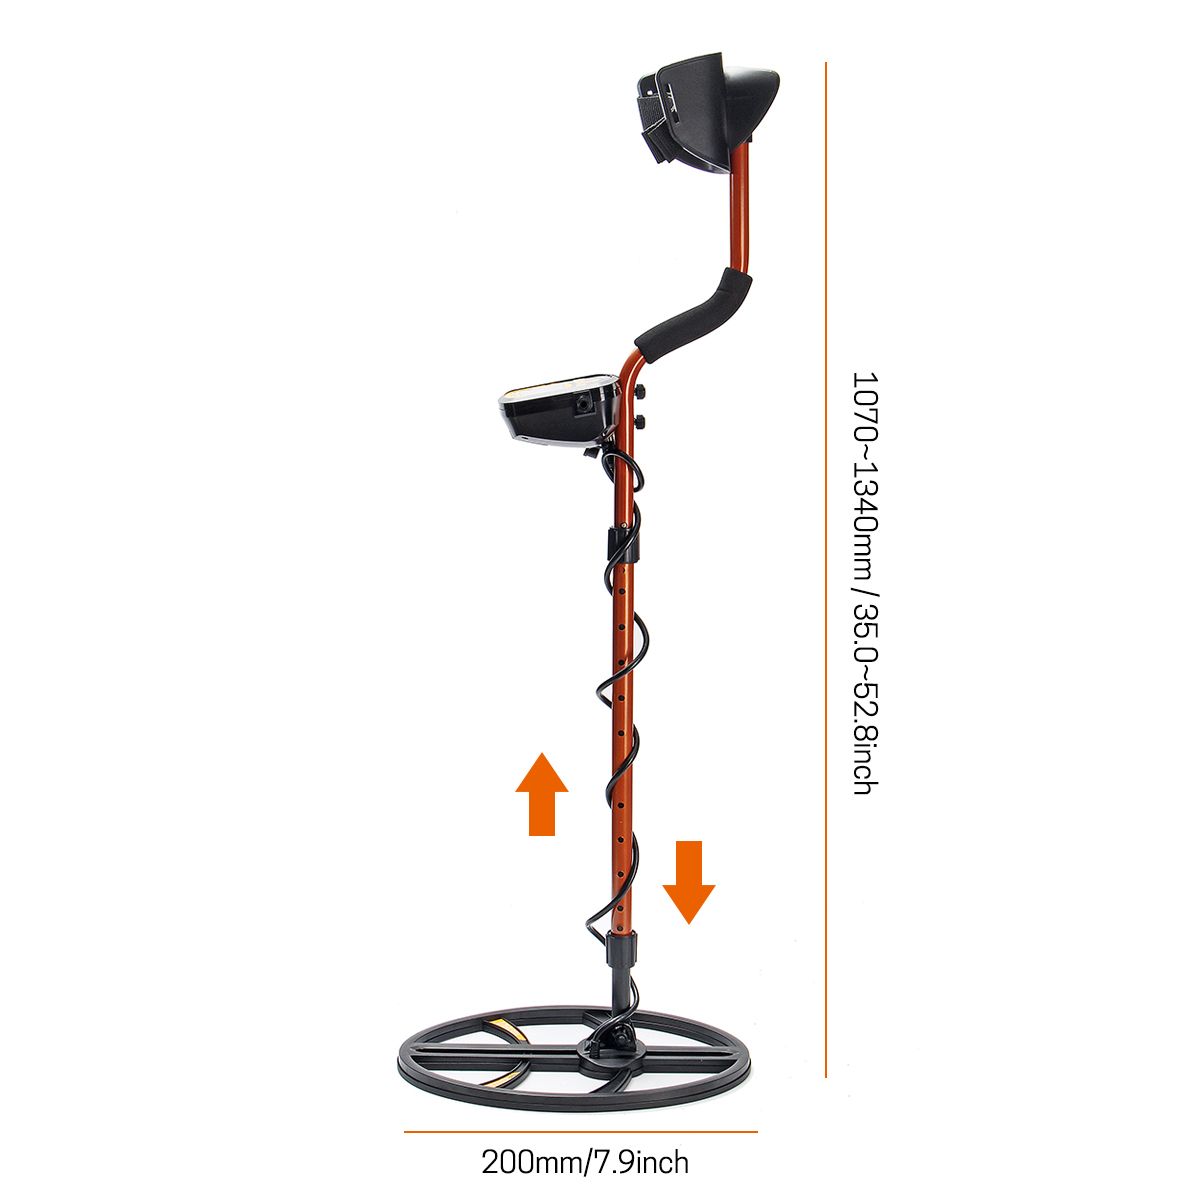 TX-950-Underground-Metal-Detector-With-LCD-Display-Gold-Silver-Finder-Jewelry-1680709